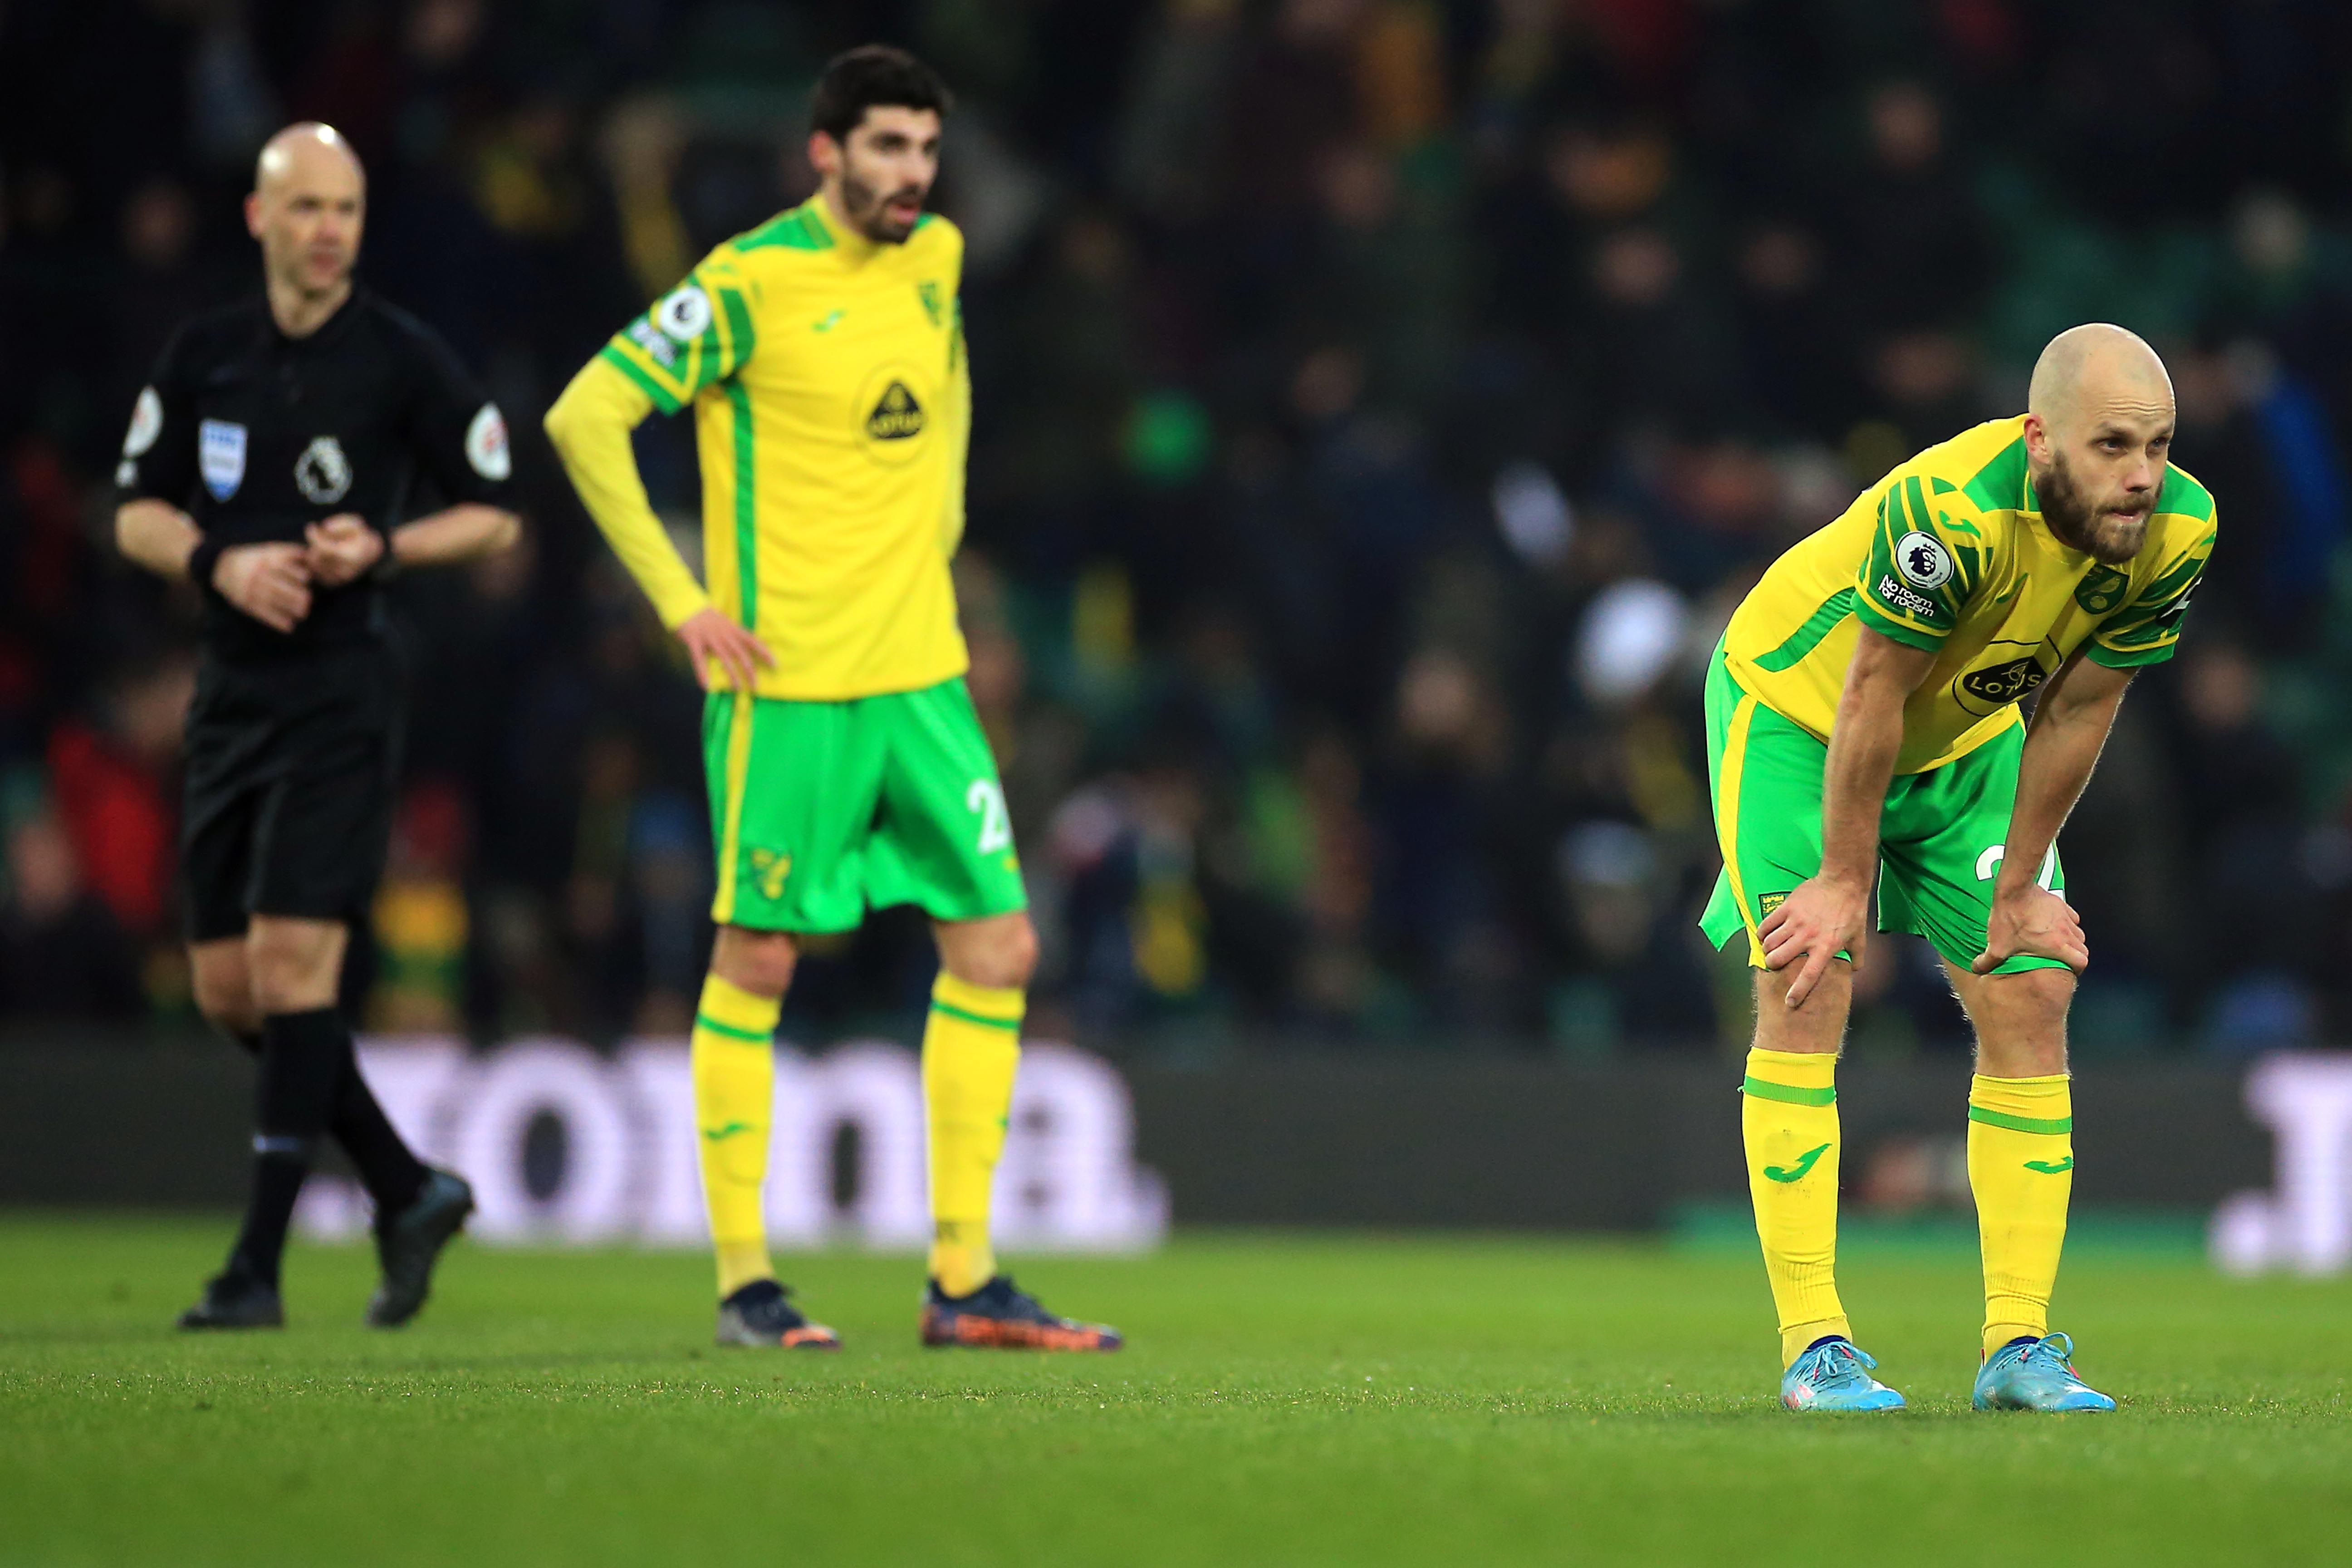 Teemu Pukki of Norwich City following the Premier League match between Norwich City and Brentford at Carrow Road on March 05, 2022